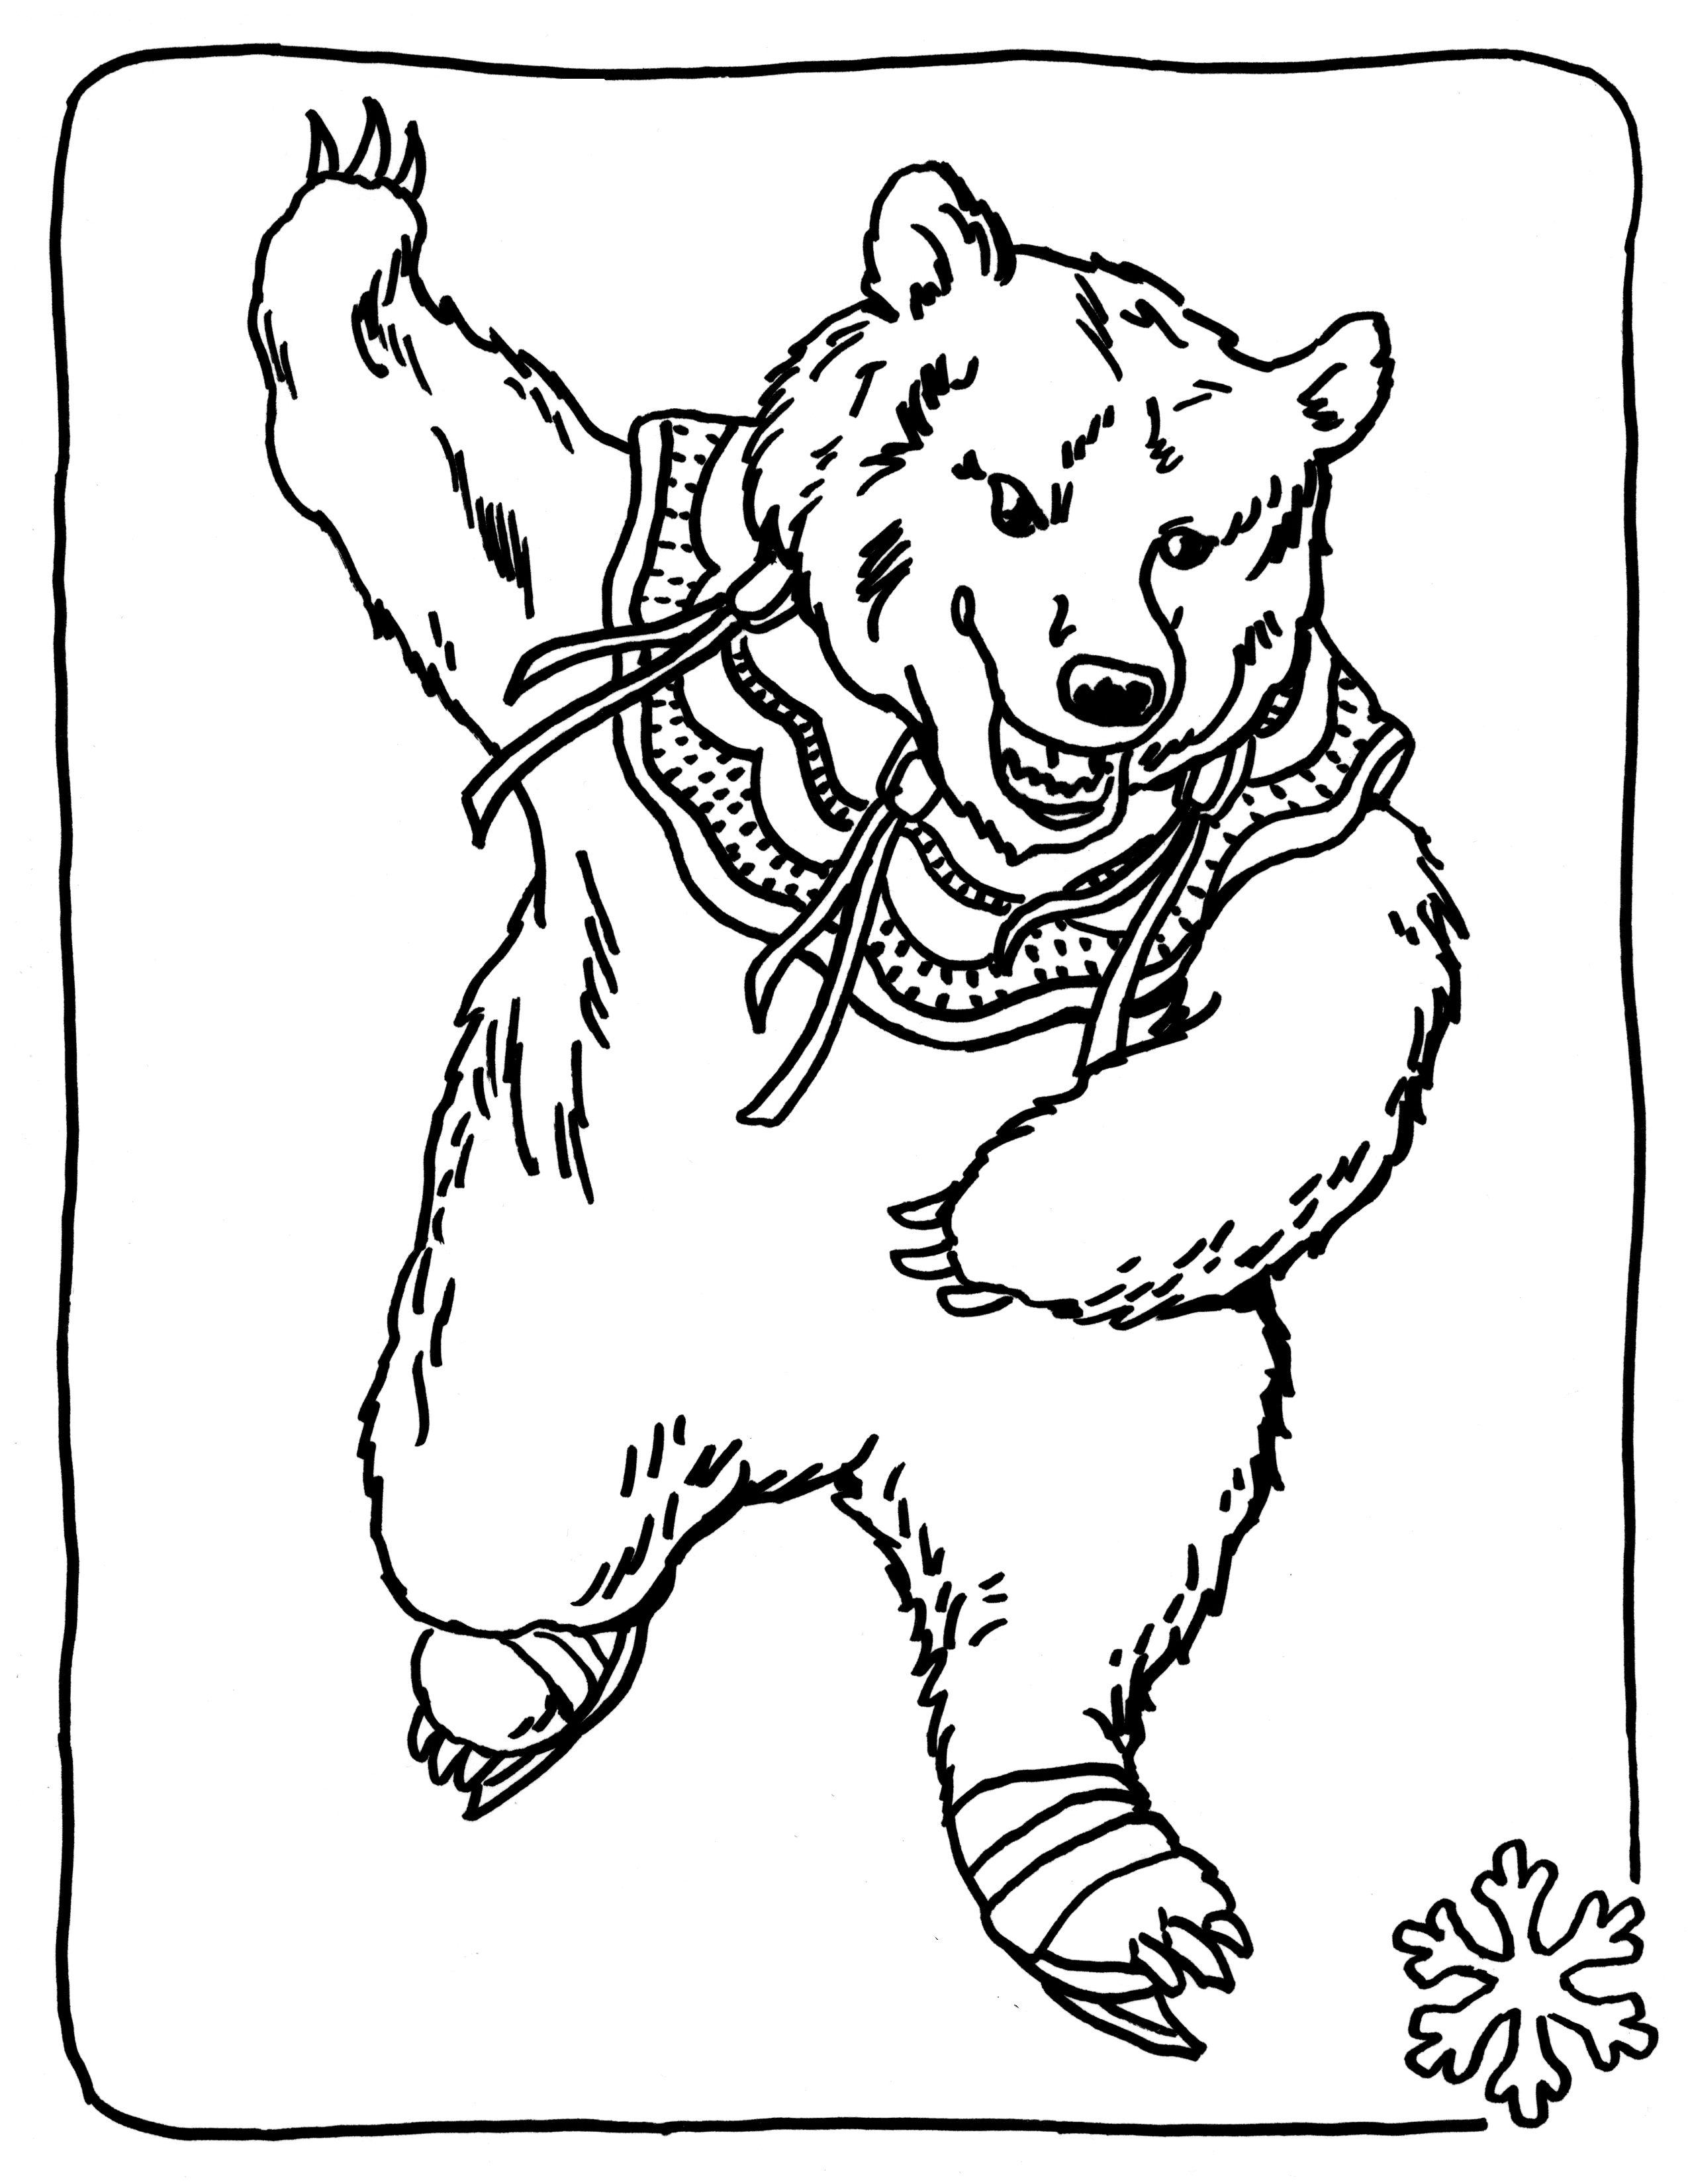 196 Simple Coloring Pages To Print for Adult